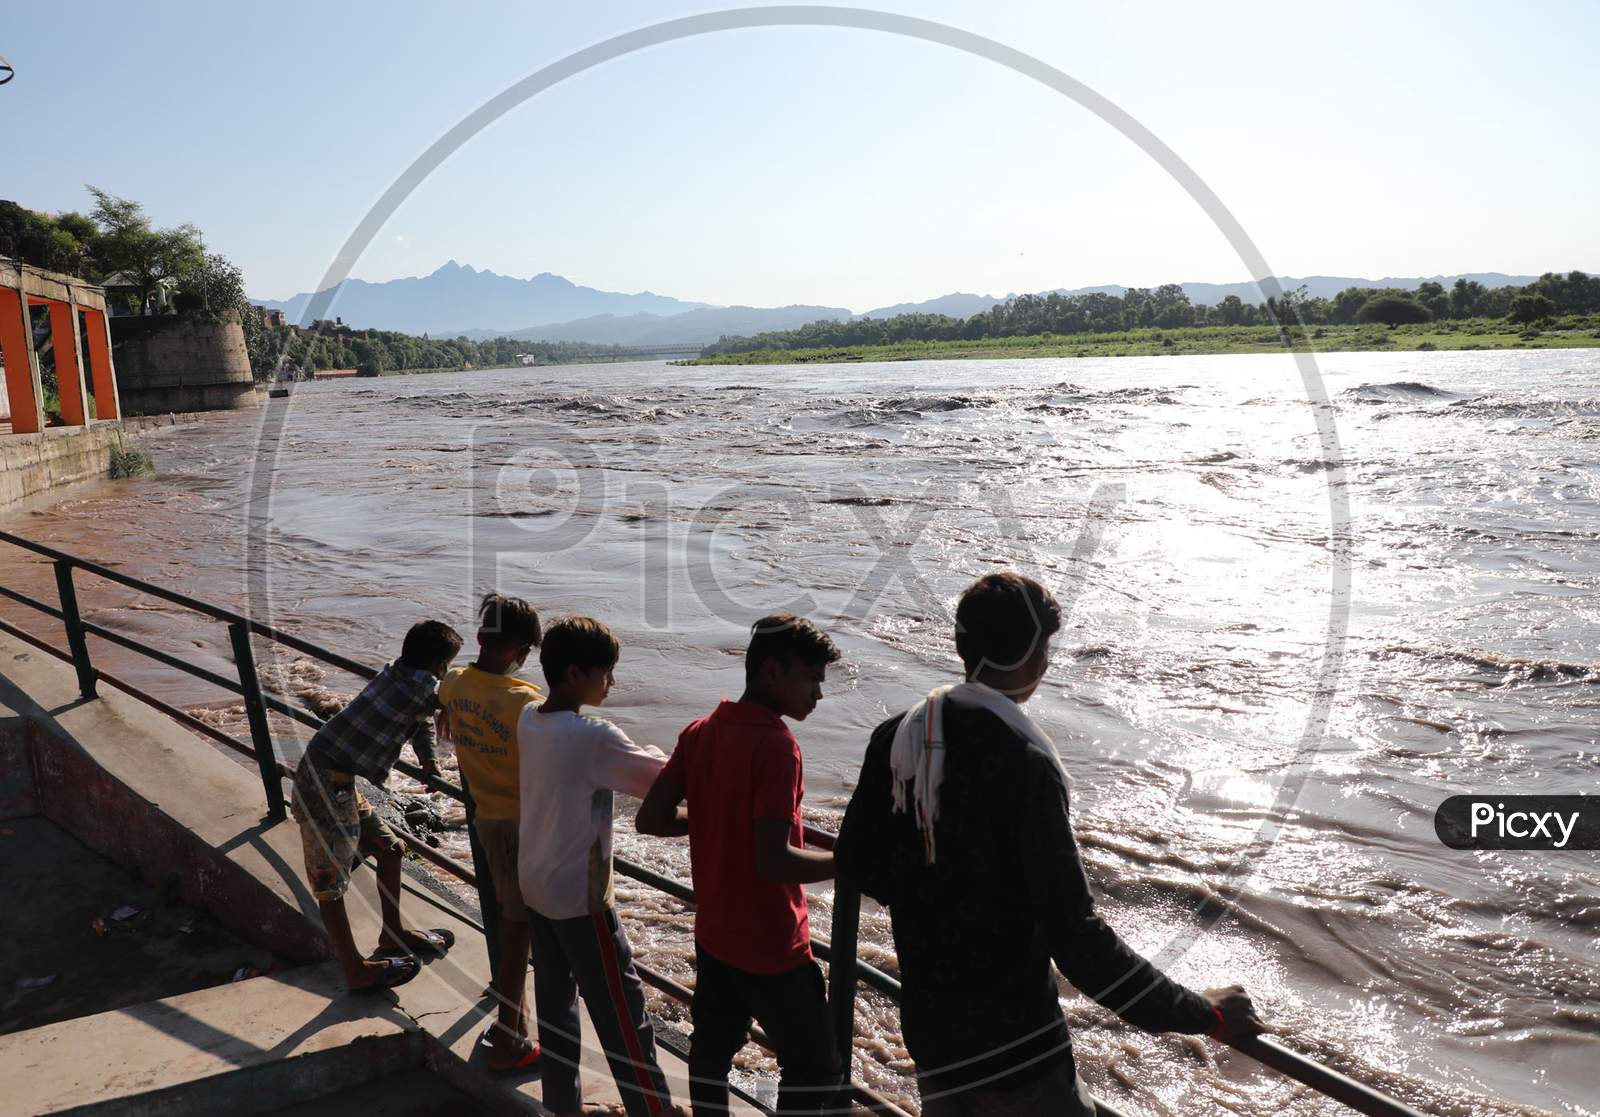 People watching river Chenab in full spate in Akhnoor area of Jammu on August 22, 2020 after authorities opened Salal Dam reservoir gates following heavy rains over the past two days in Jammu and Kashmir.